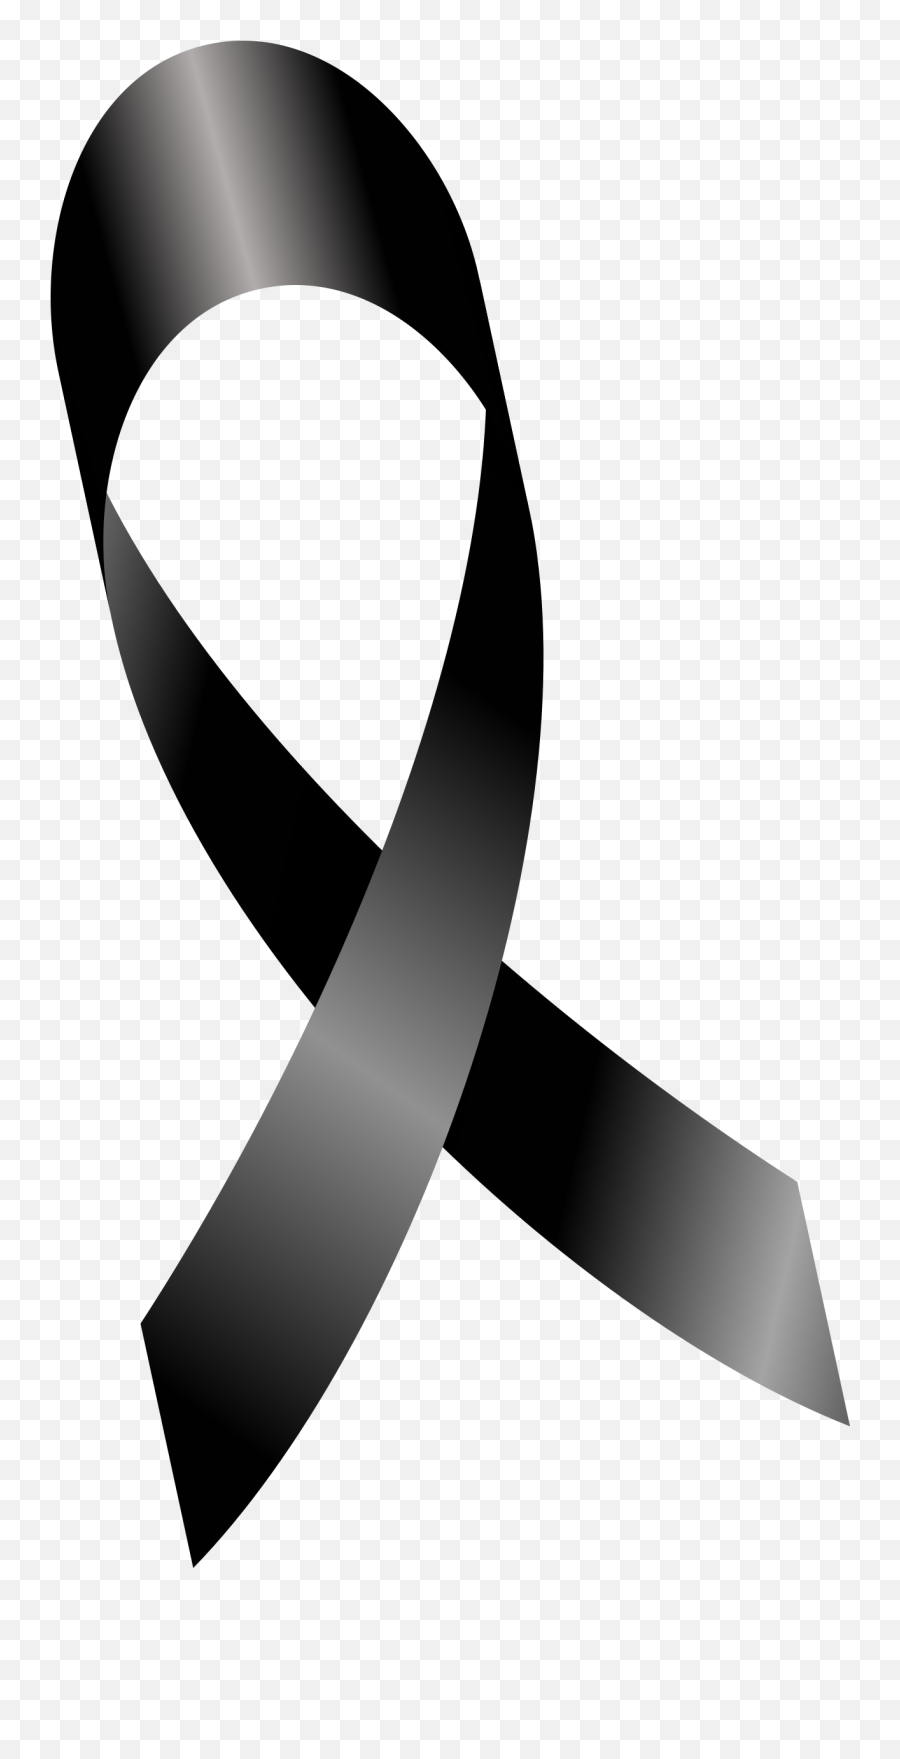 Ribbon Clip Art - Mourning Png Download 12562400 Free Mourn Black Ribbon,Black Ribbon Png